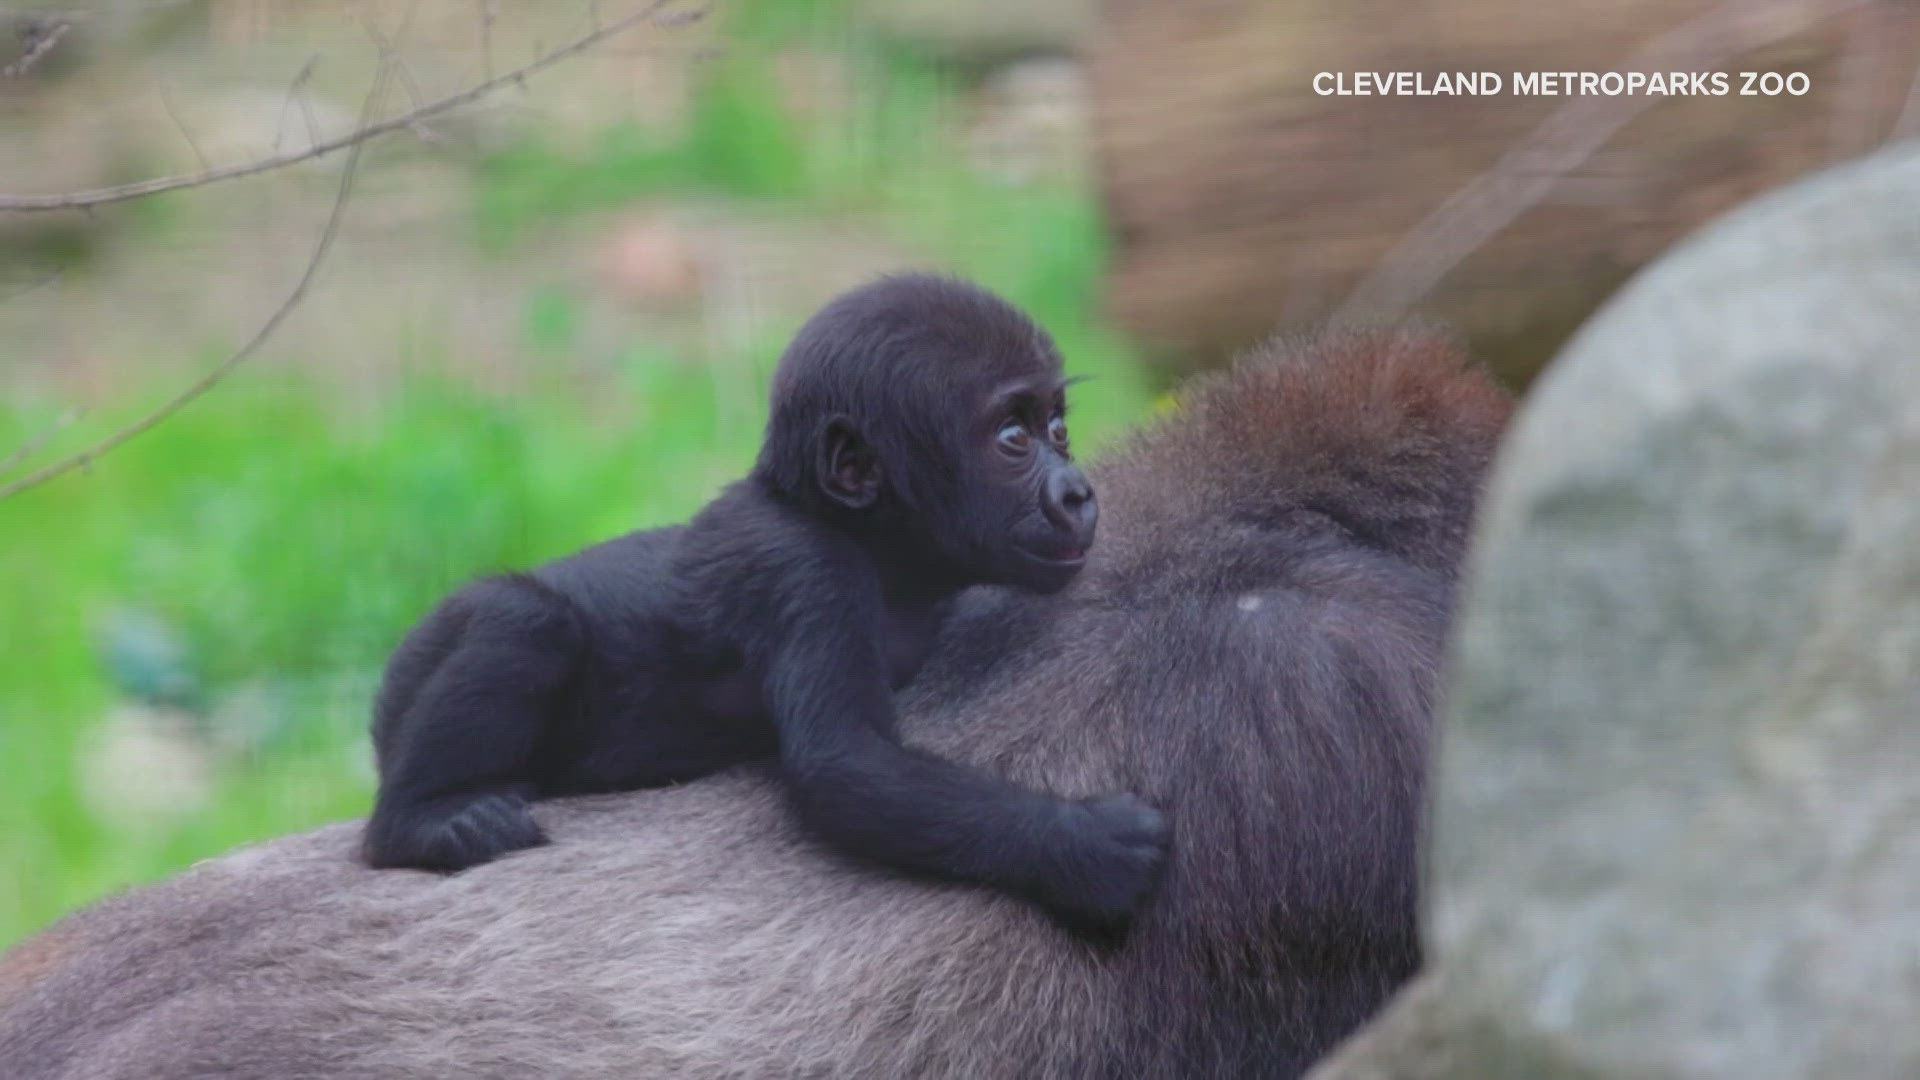 Cleveland Zoo officials said her birth in early January made international headlines after life-threatening complications threatened the health of her mother.